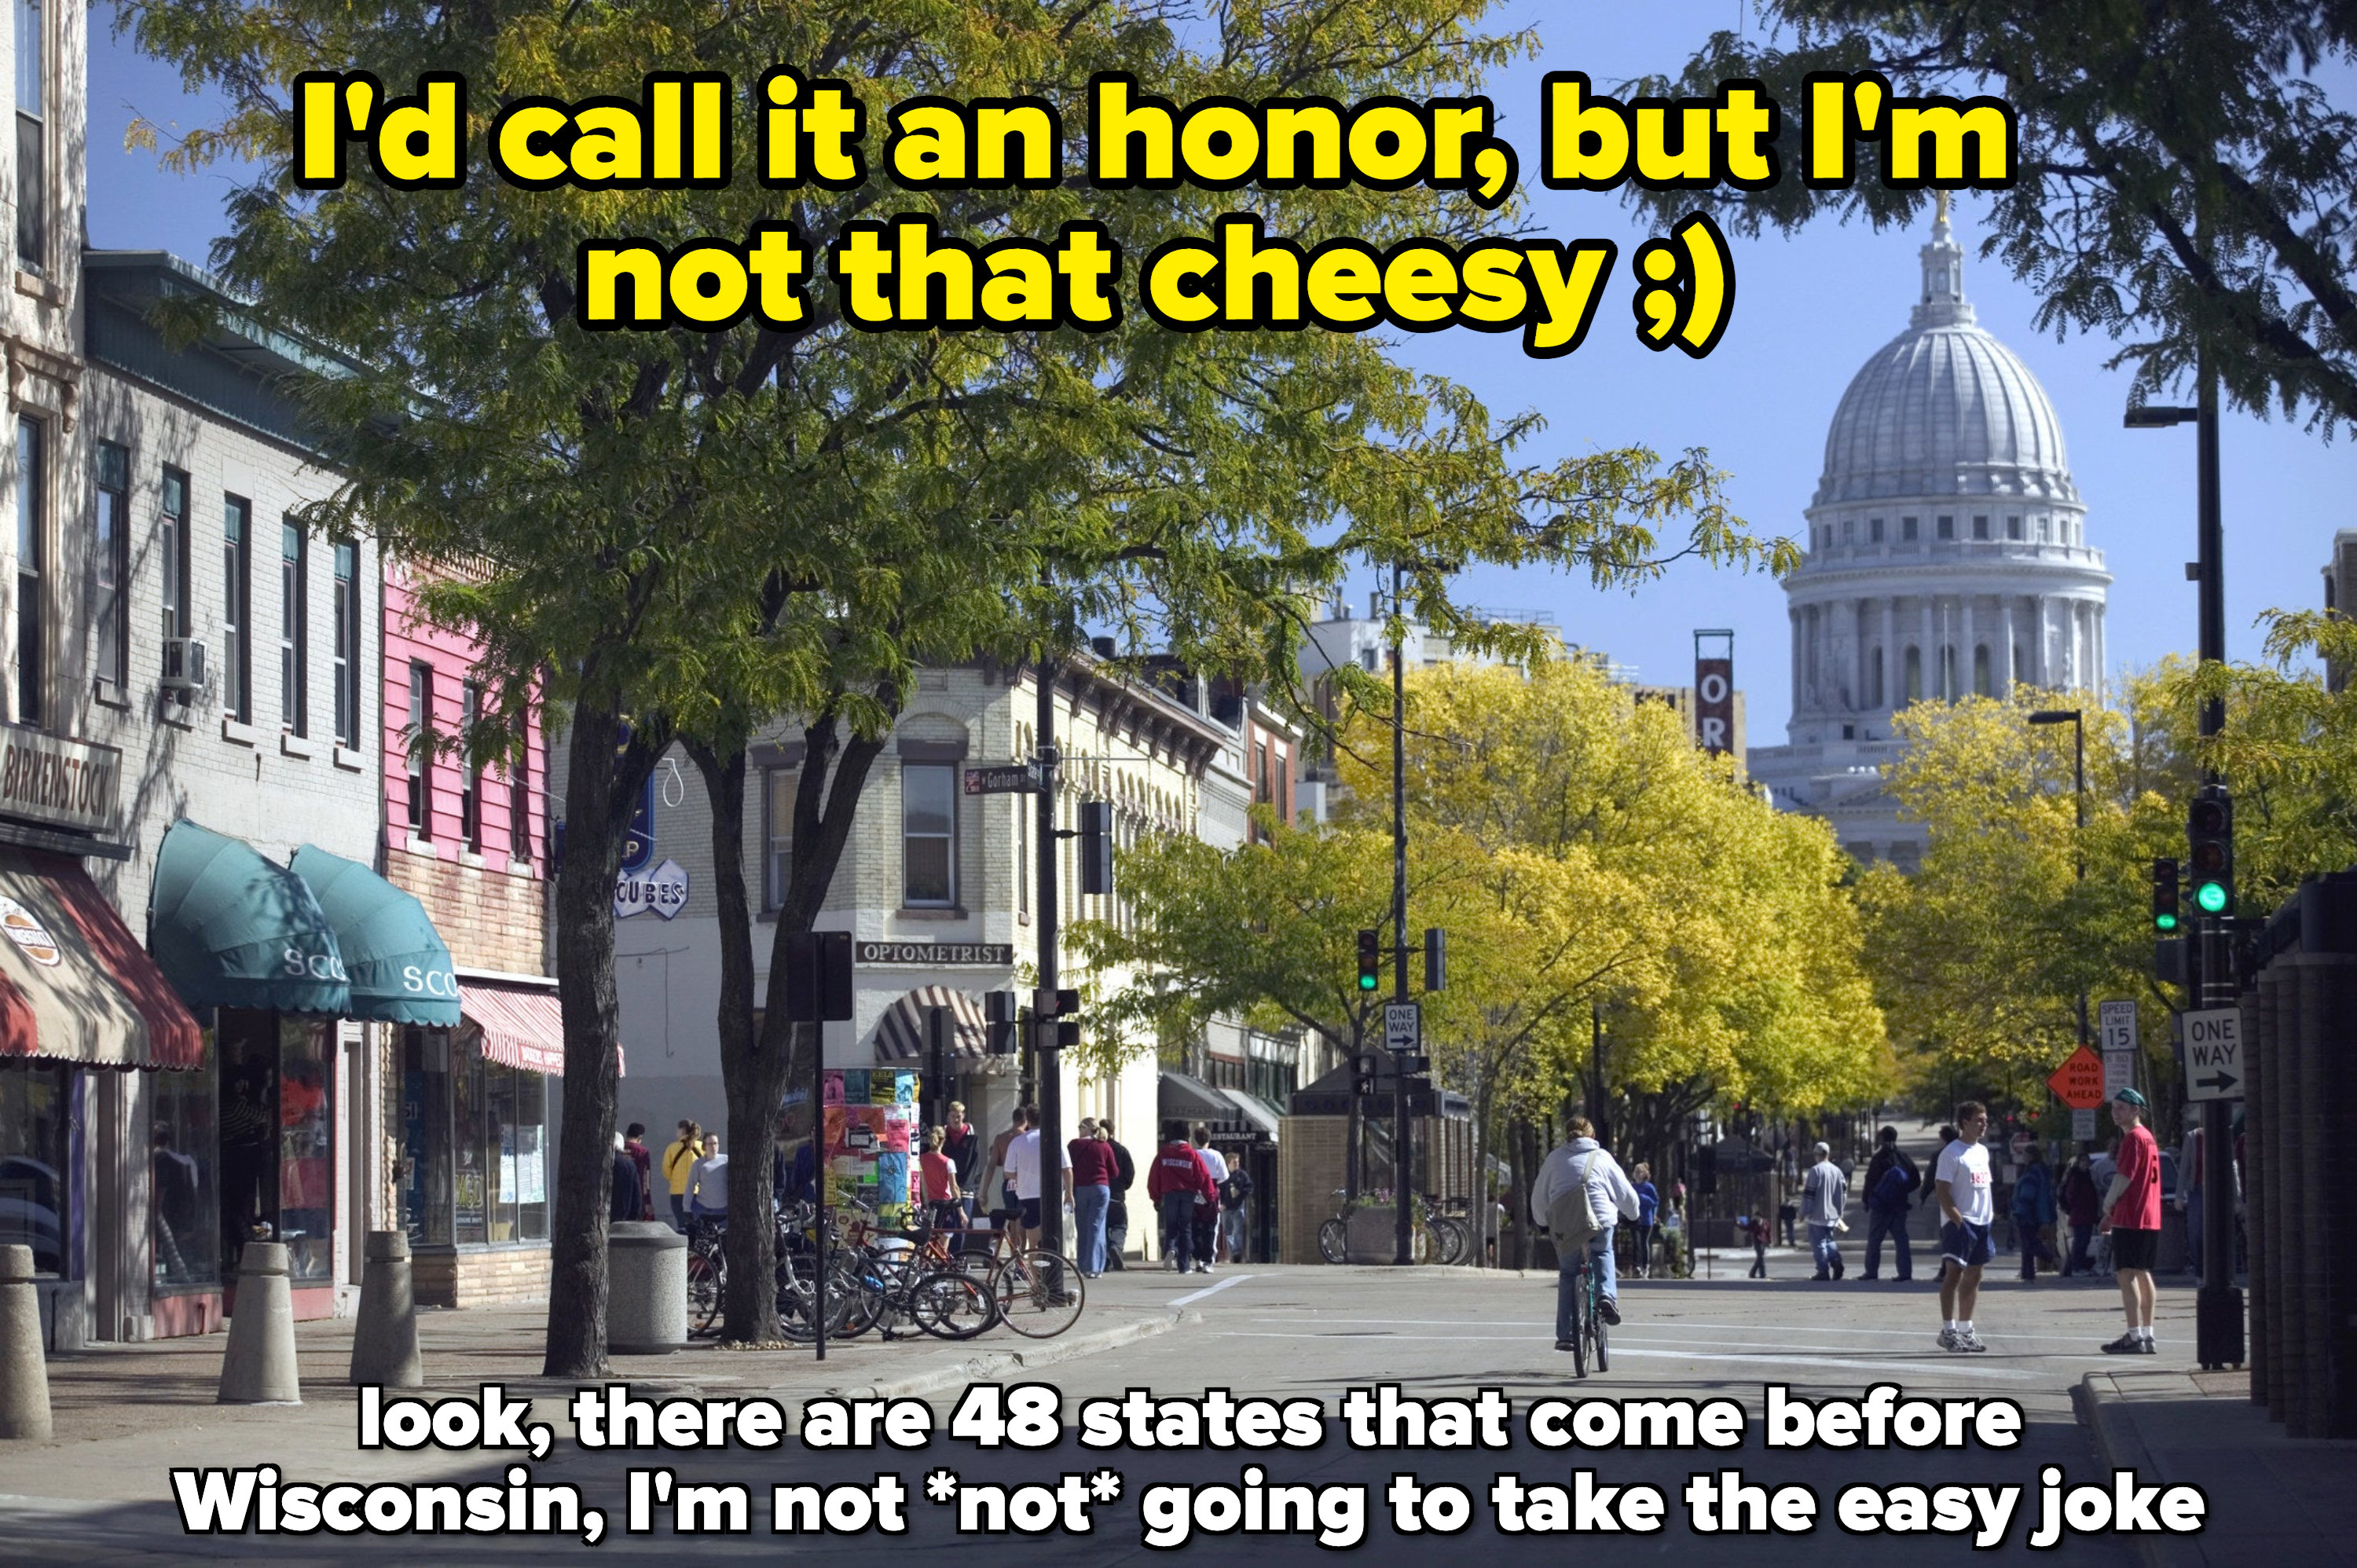 A madison street, with caption: I&#x27;d call it an honor, but I&#x27;m not that cheesy (winking face), plus below: look, there are 48 states that come before Wisconsin, I&#x27;m not not going to take the easy joke